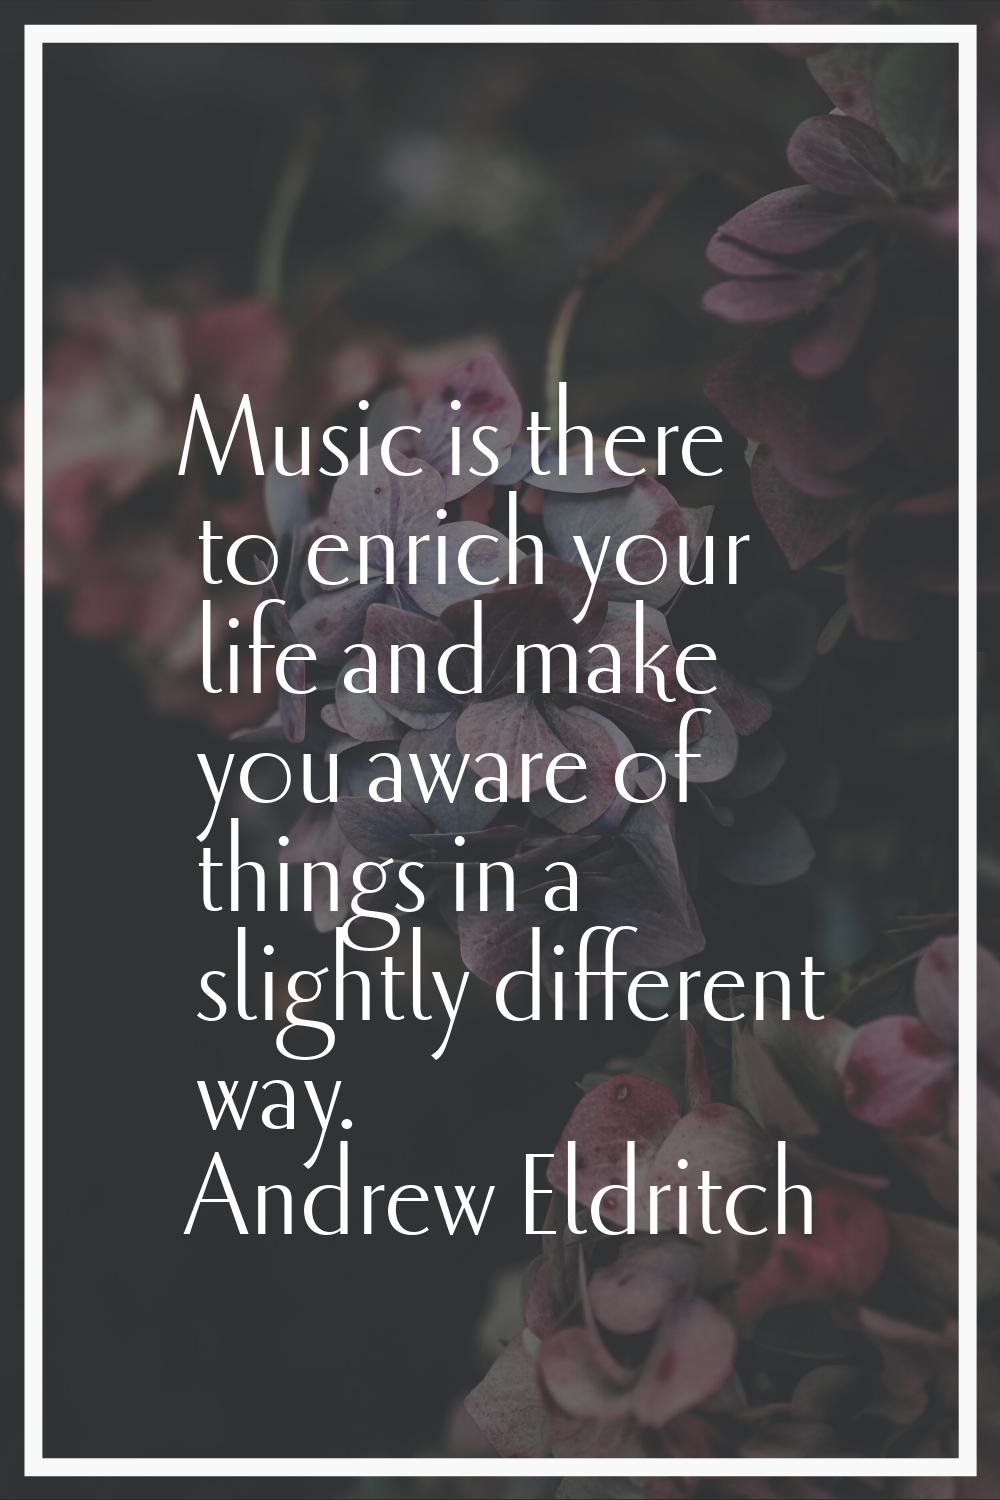 Music is there to enrich your life and make you aware of things in a slightly different way.